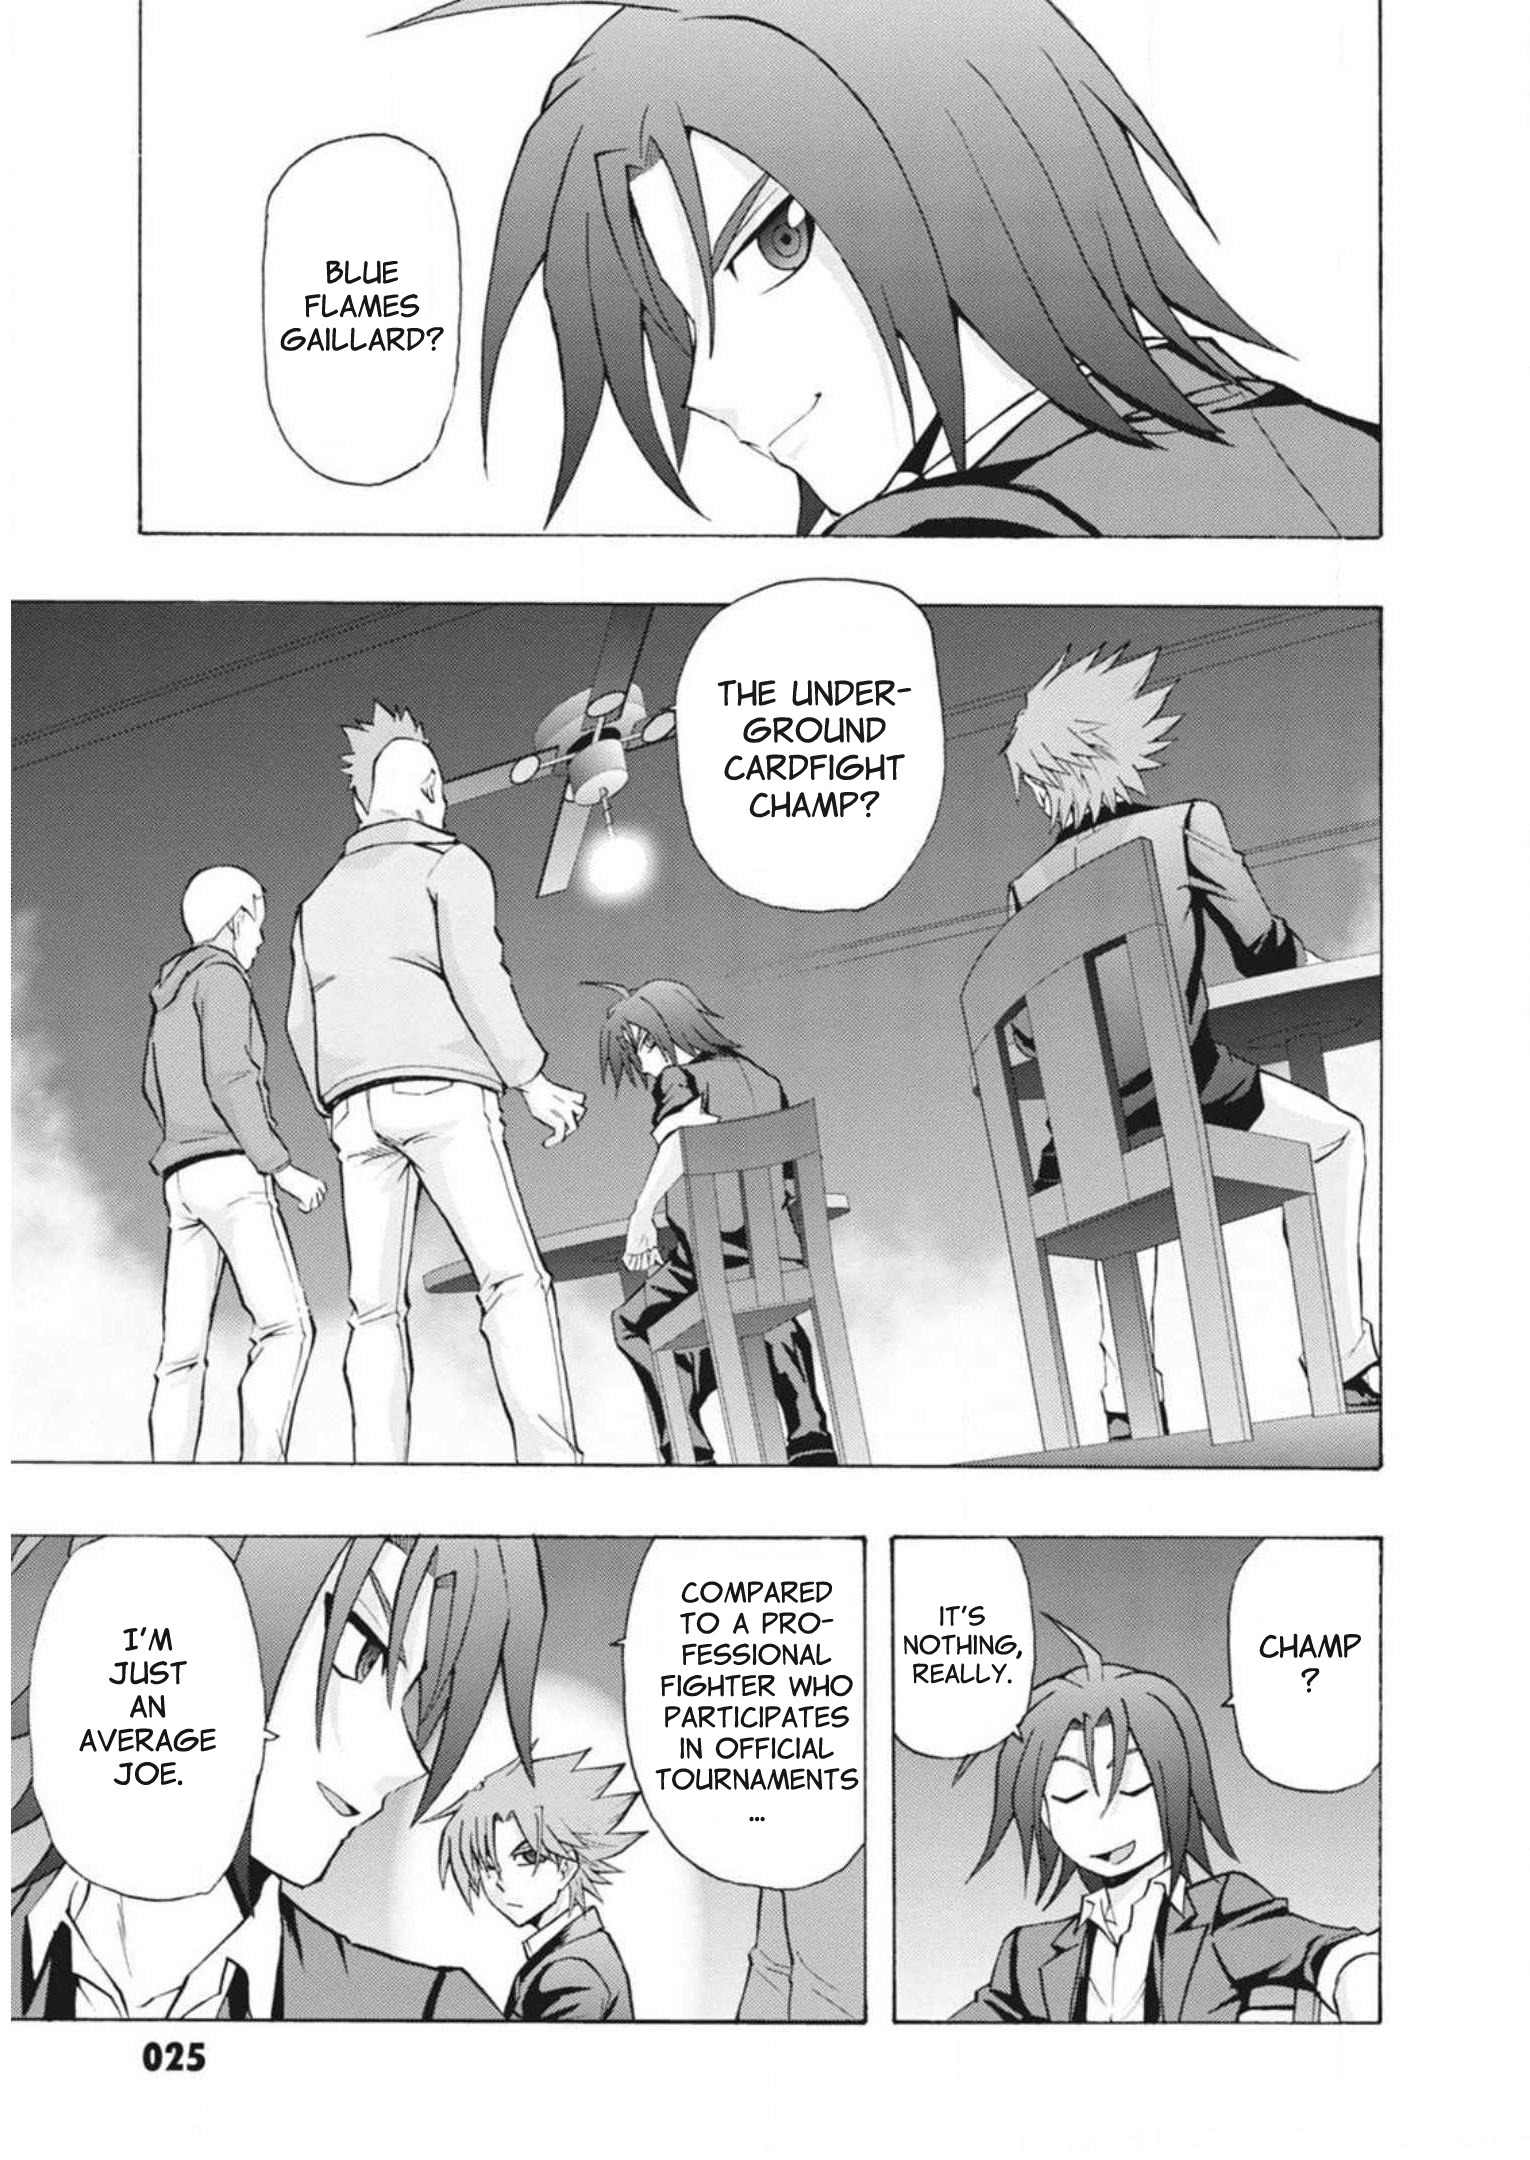 Cardfight!! Vanguard: Turnabout Vol.1 Chapter 2: A Real Fight - Picture 1